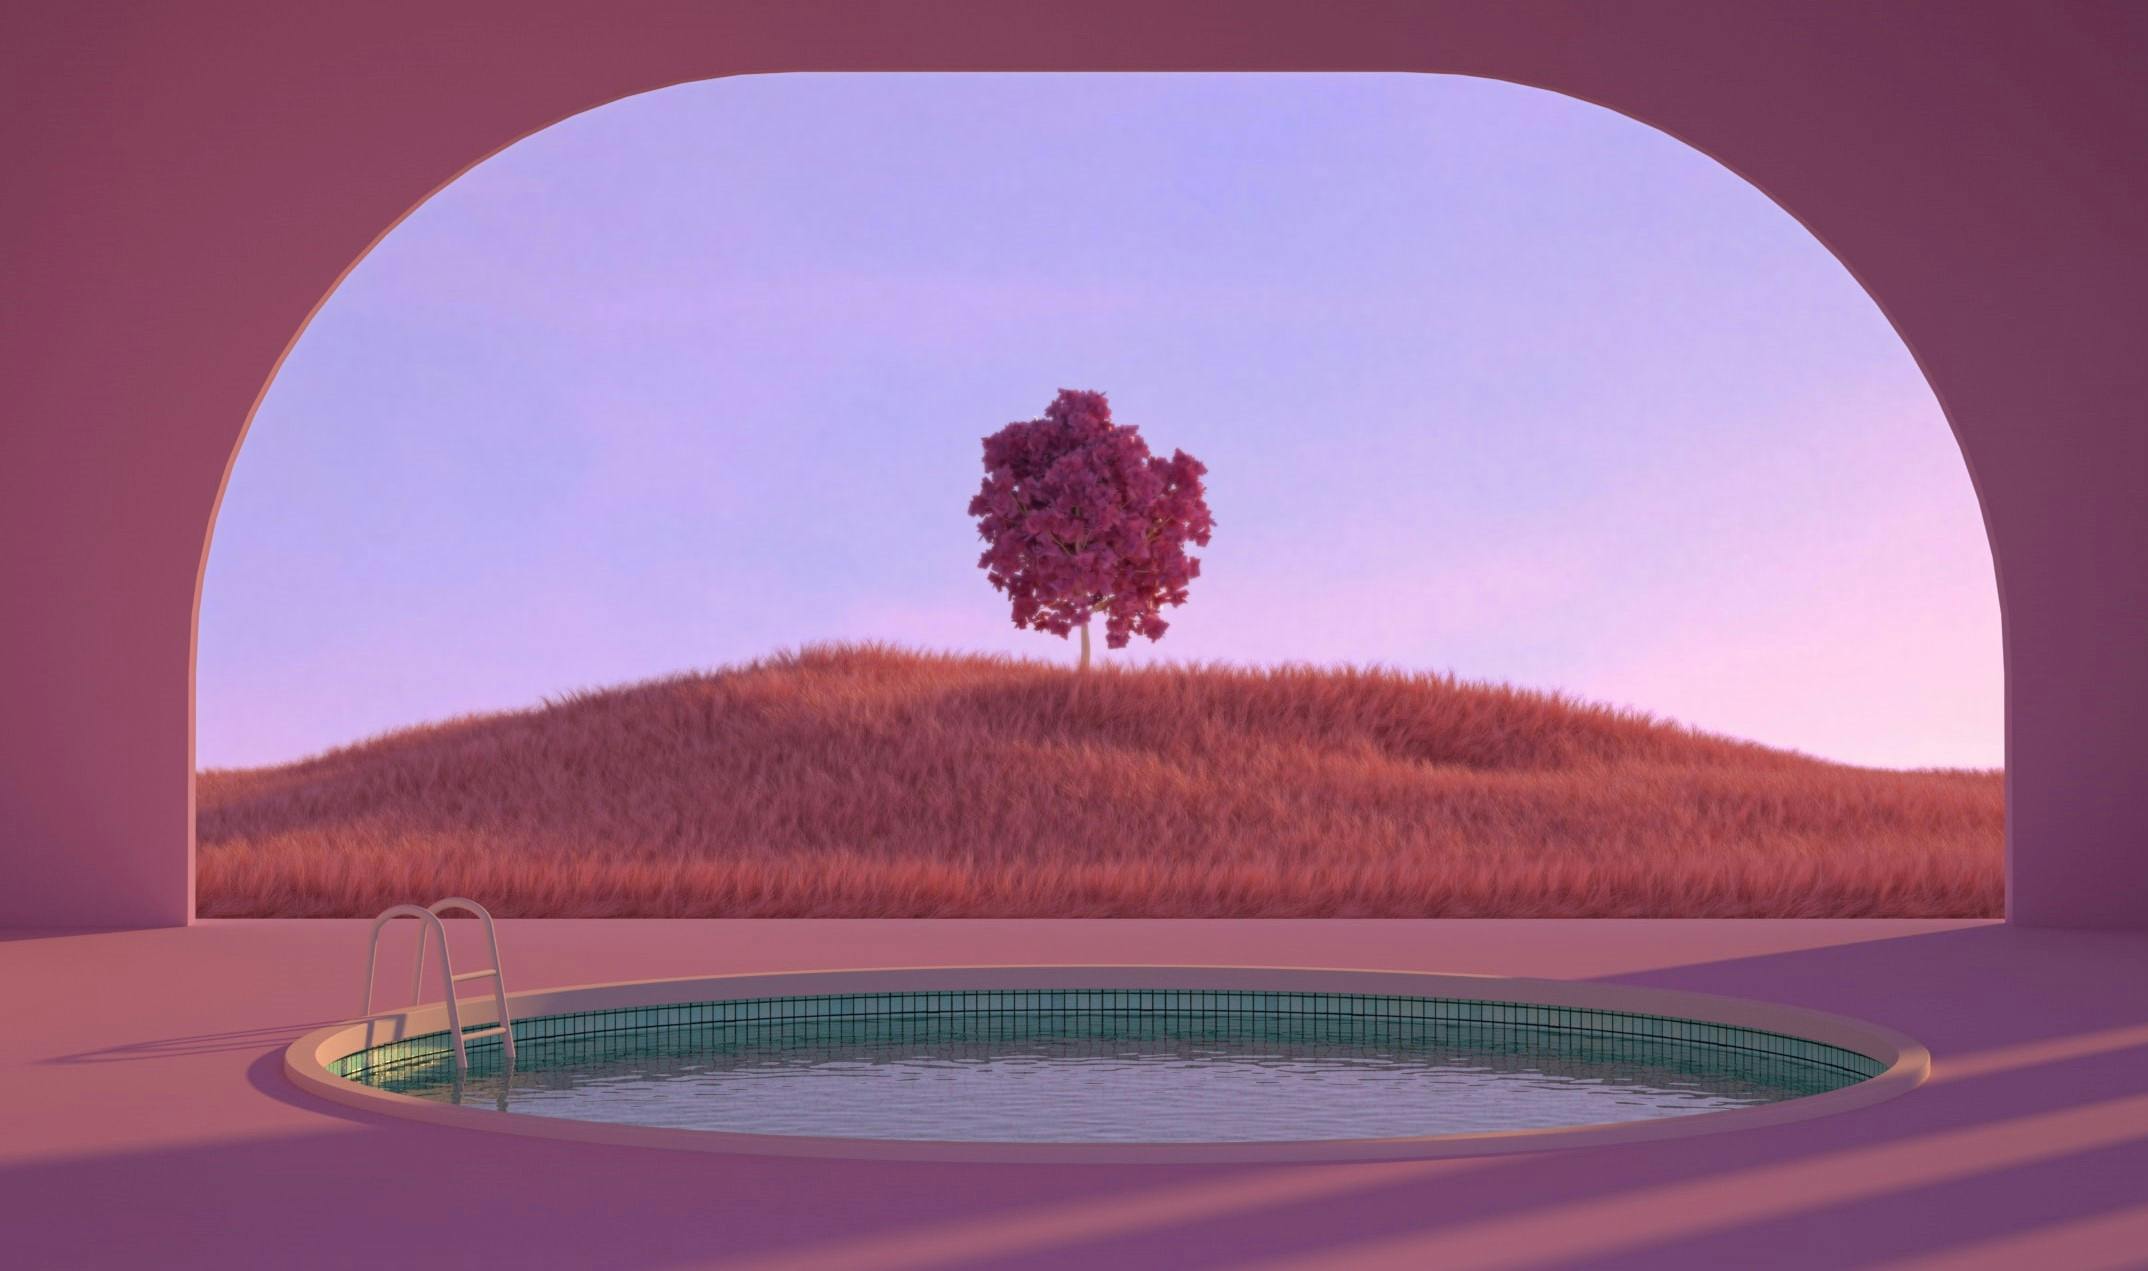 A photo of a digital world with no metaverse users. The world has a swimming pool with a window that looks out on a pink field with a pink tree